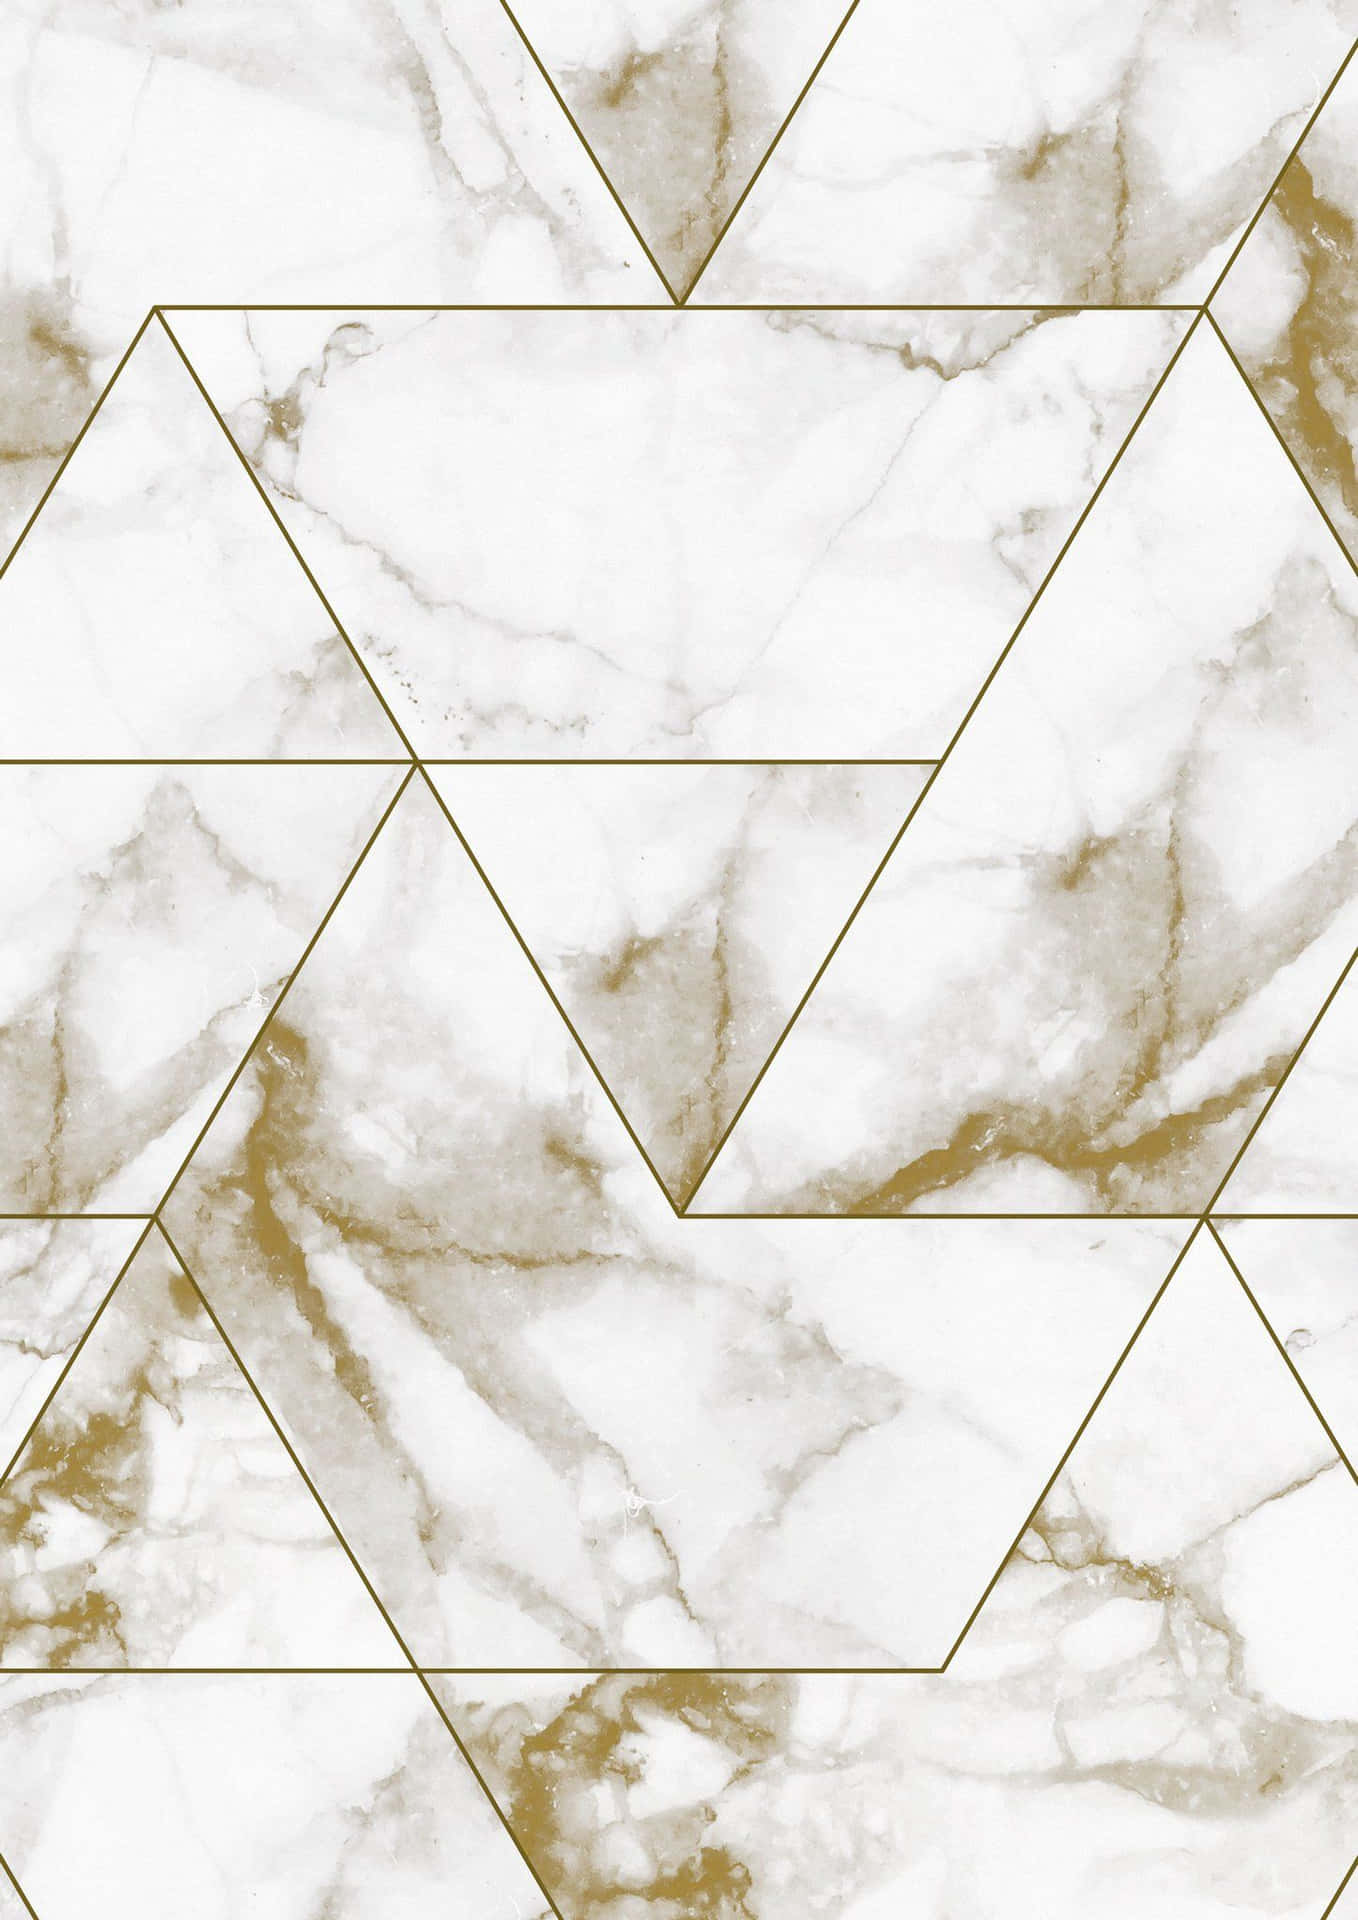 Caption: Luxurious Gold Marble Background